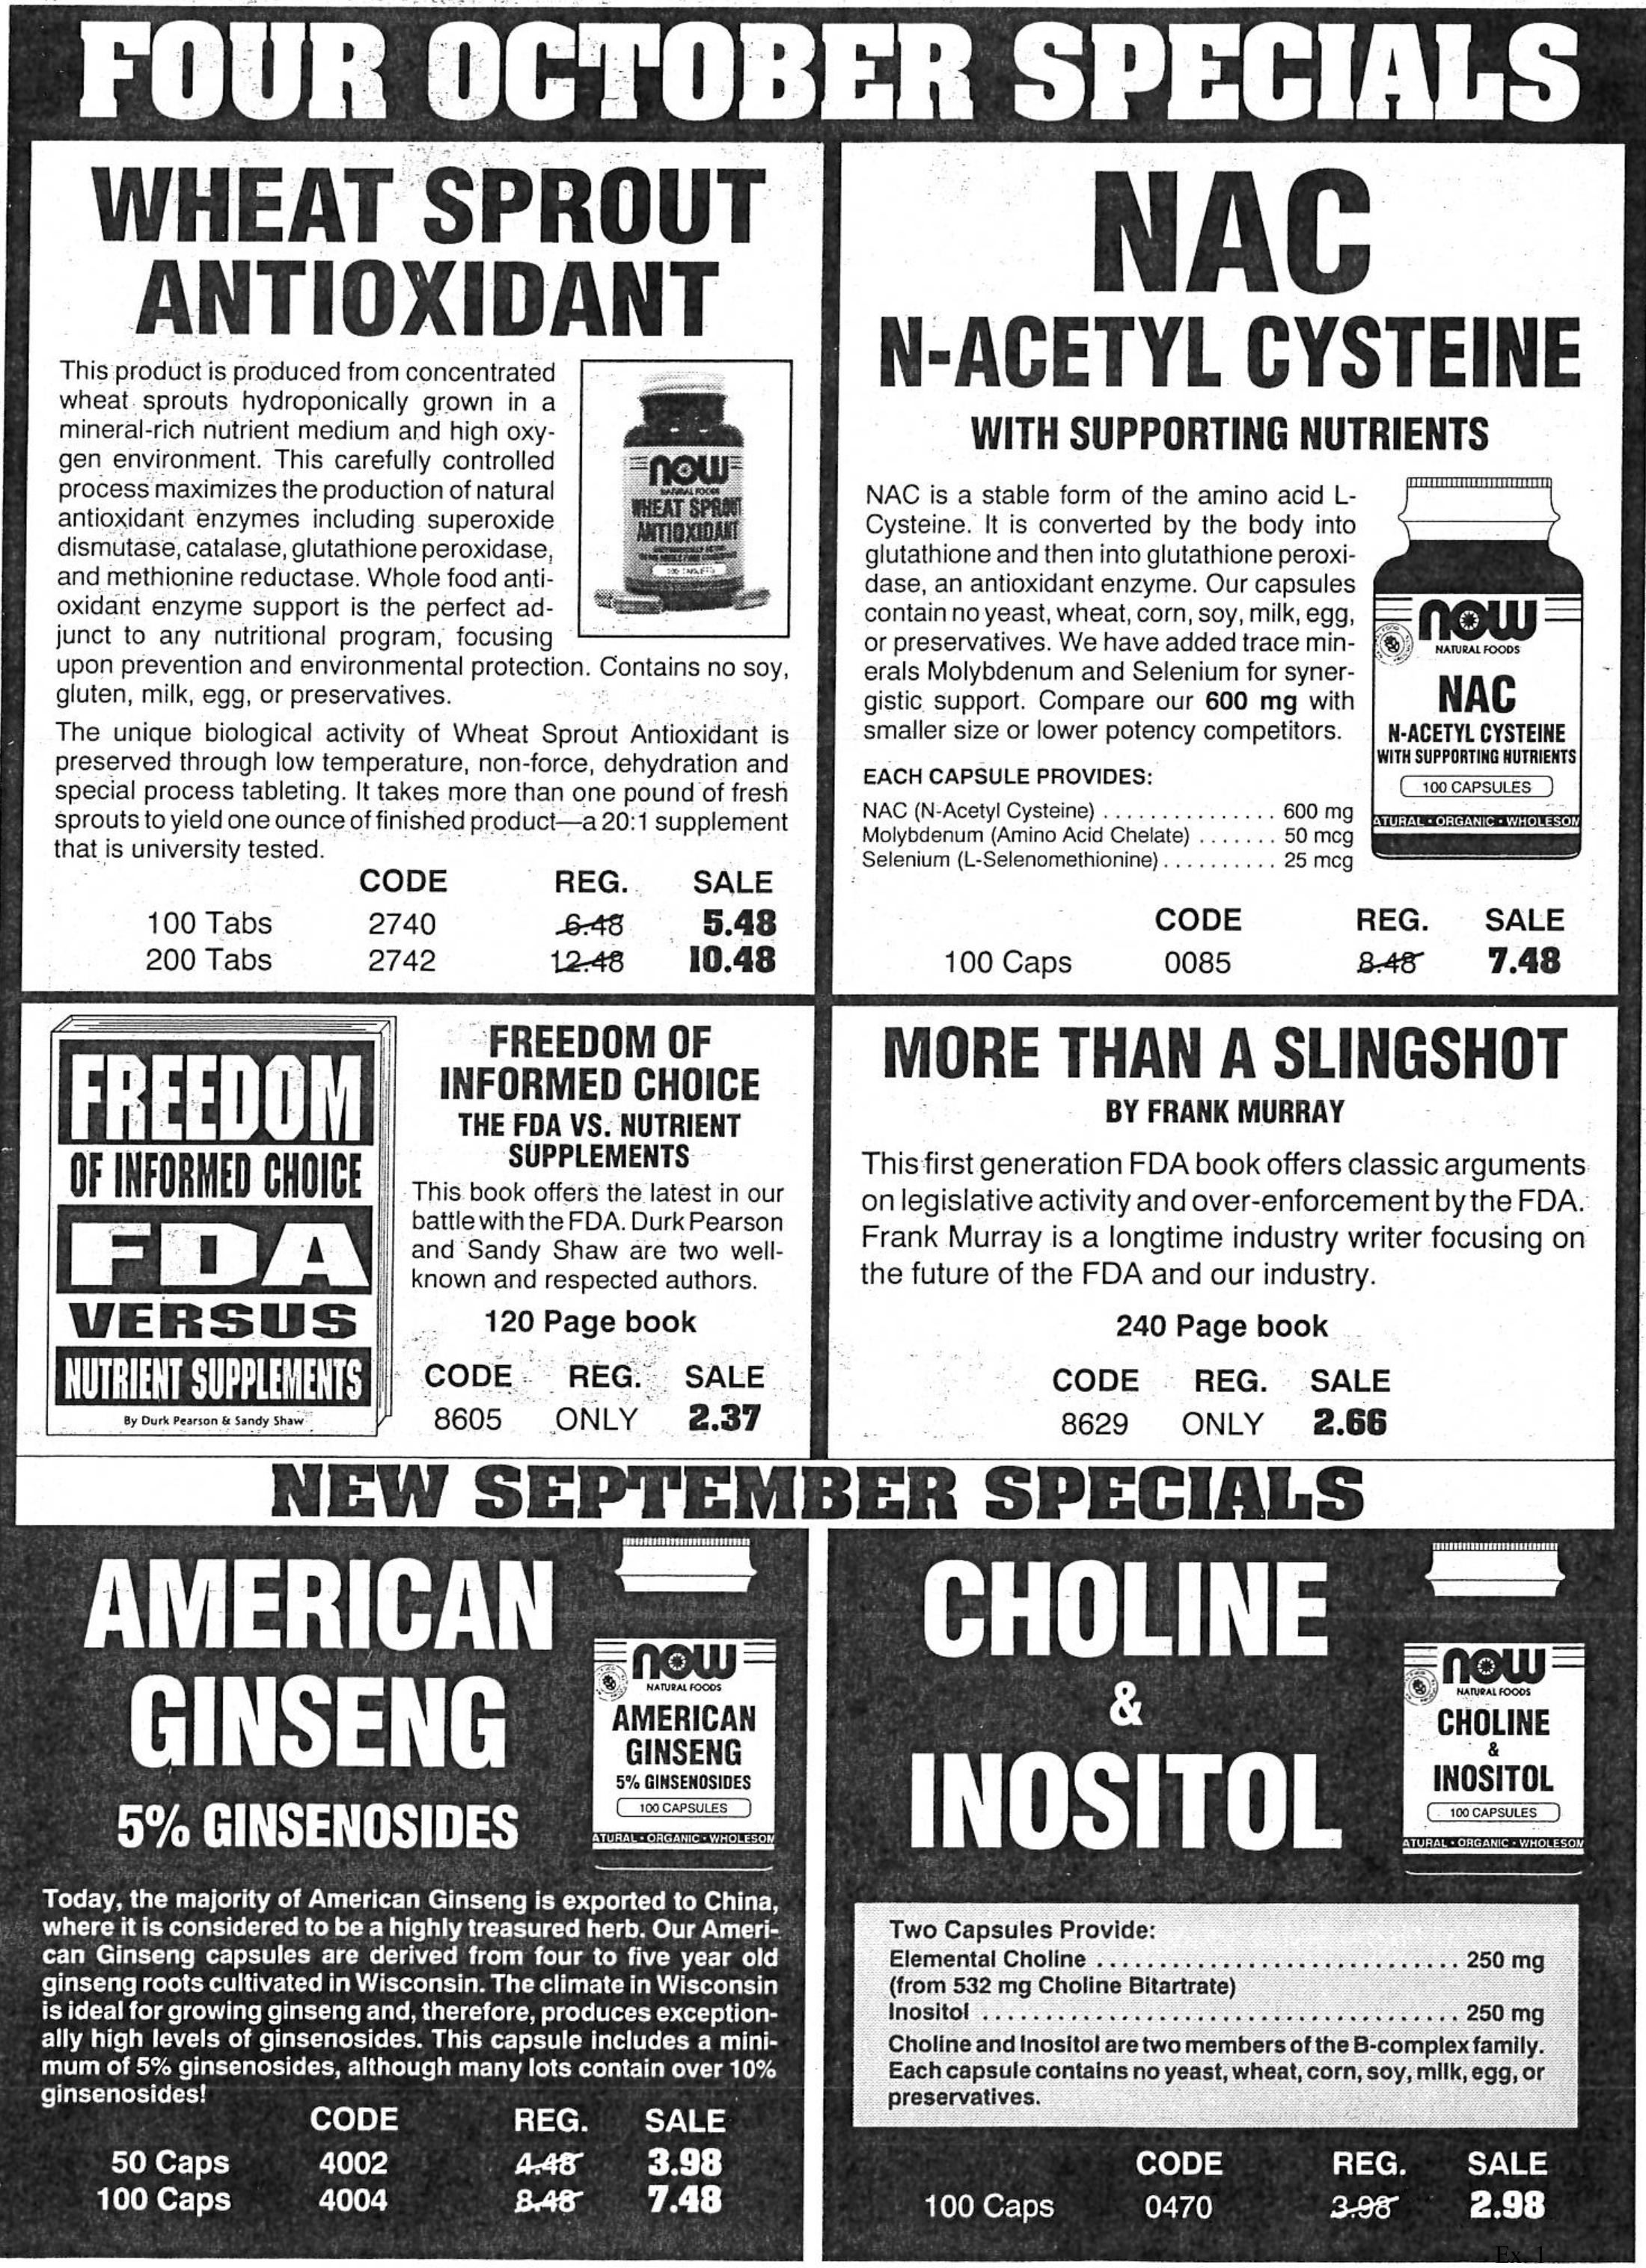 NAC Was Sold Before 1994 and is a LEGAL Dietary Supplement